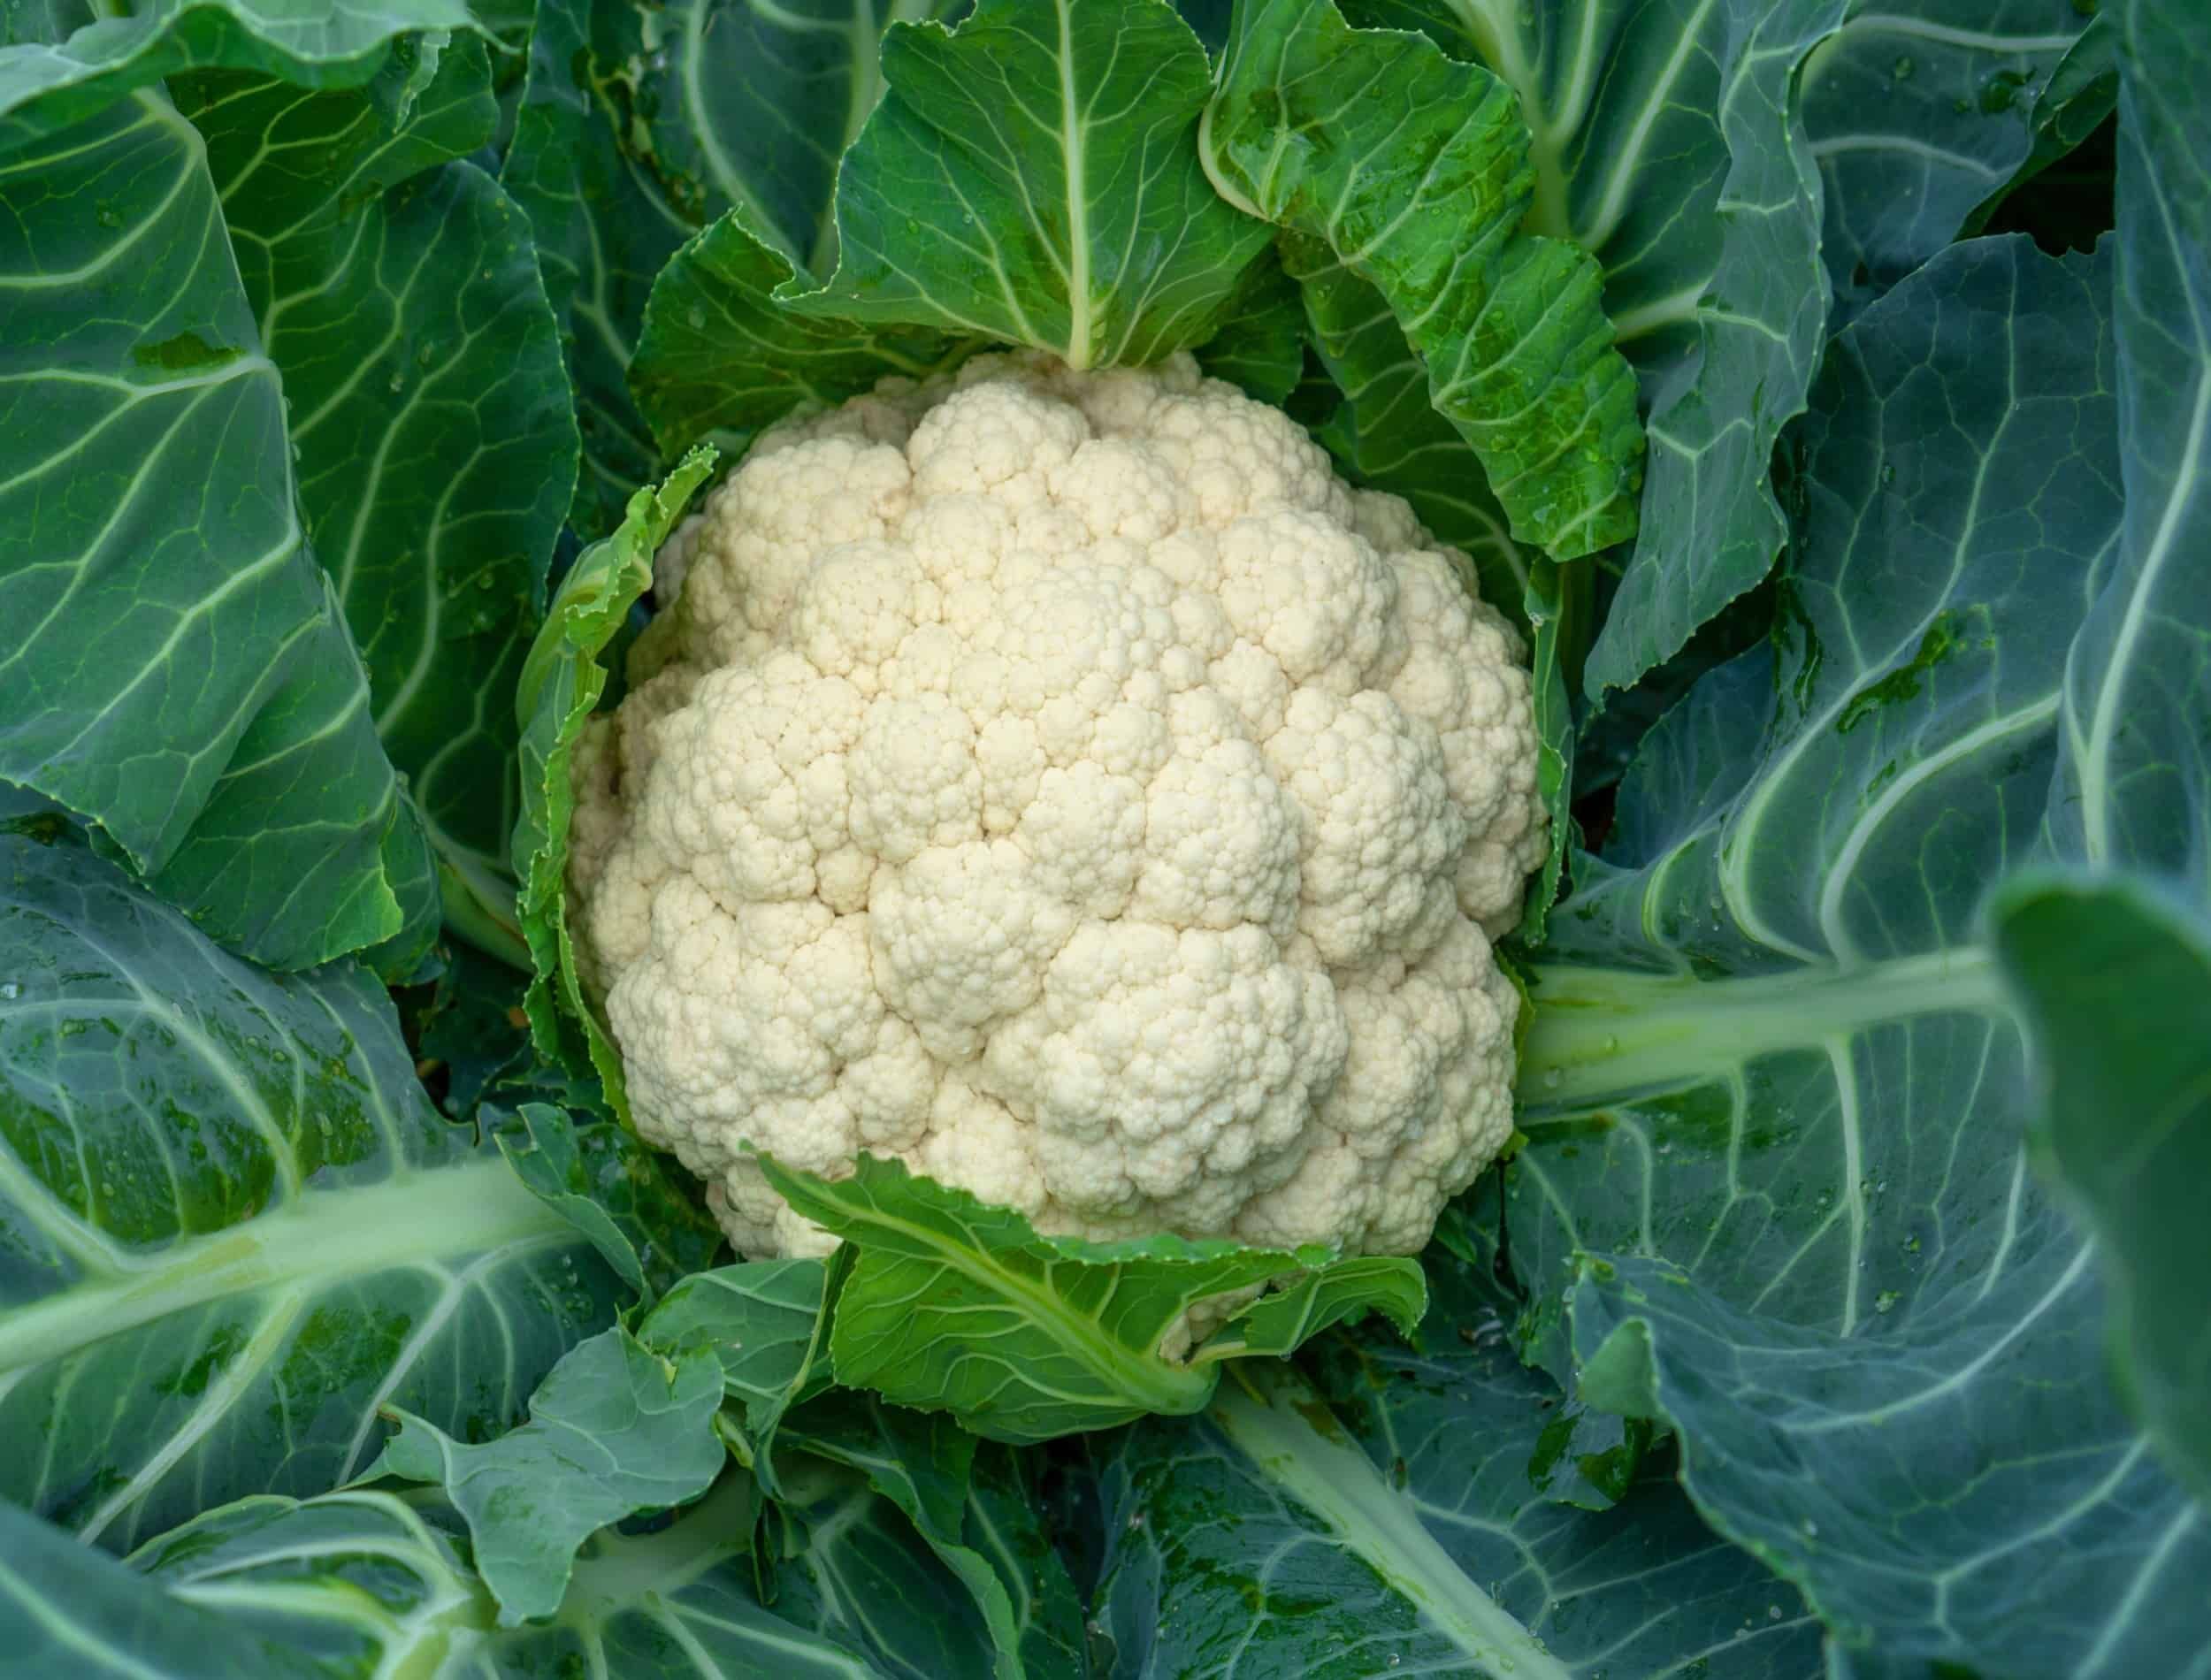 Cauliflower grows in organic soil in the garden on the vegetable area. Cauliflower head in natural conditions, close-up